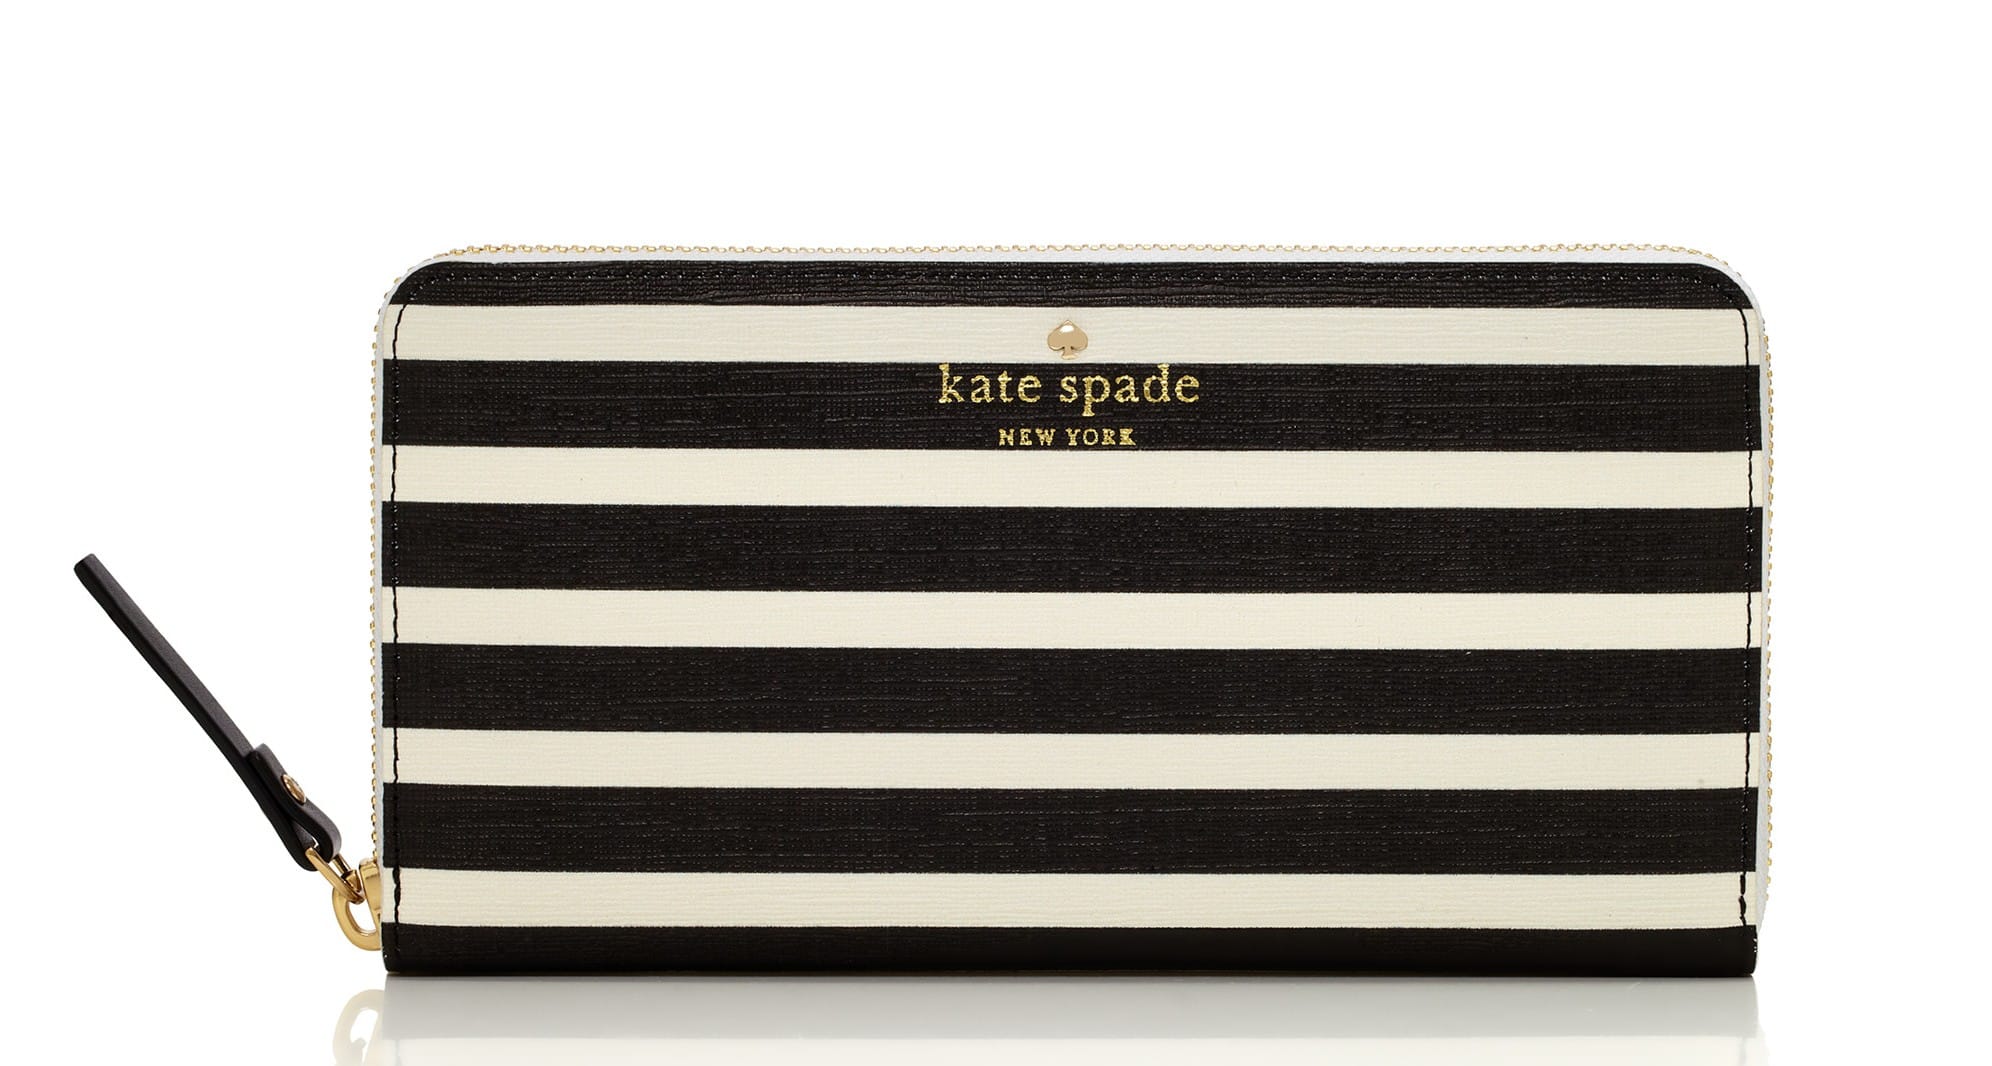 fairmount-square-lacey-kate-spade-gift-mom-cococozy-mothers-day-gift-ideas